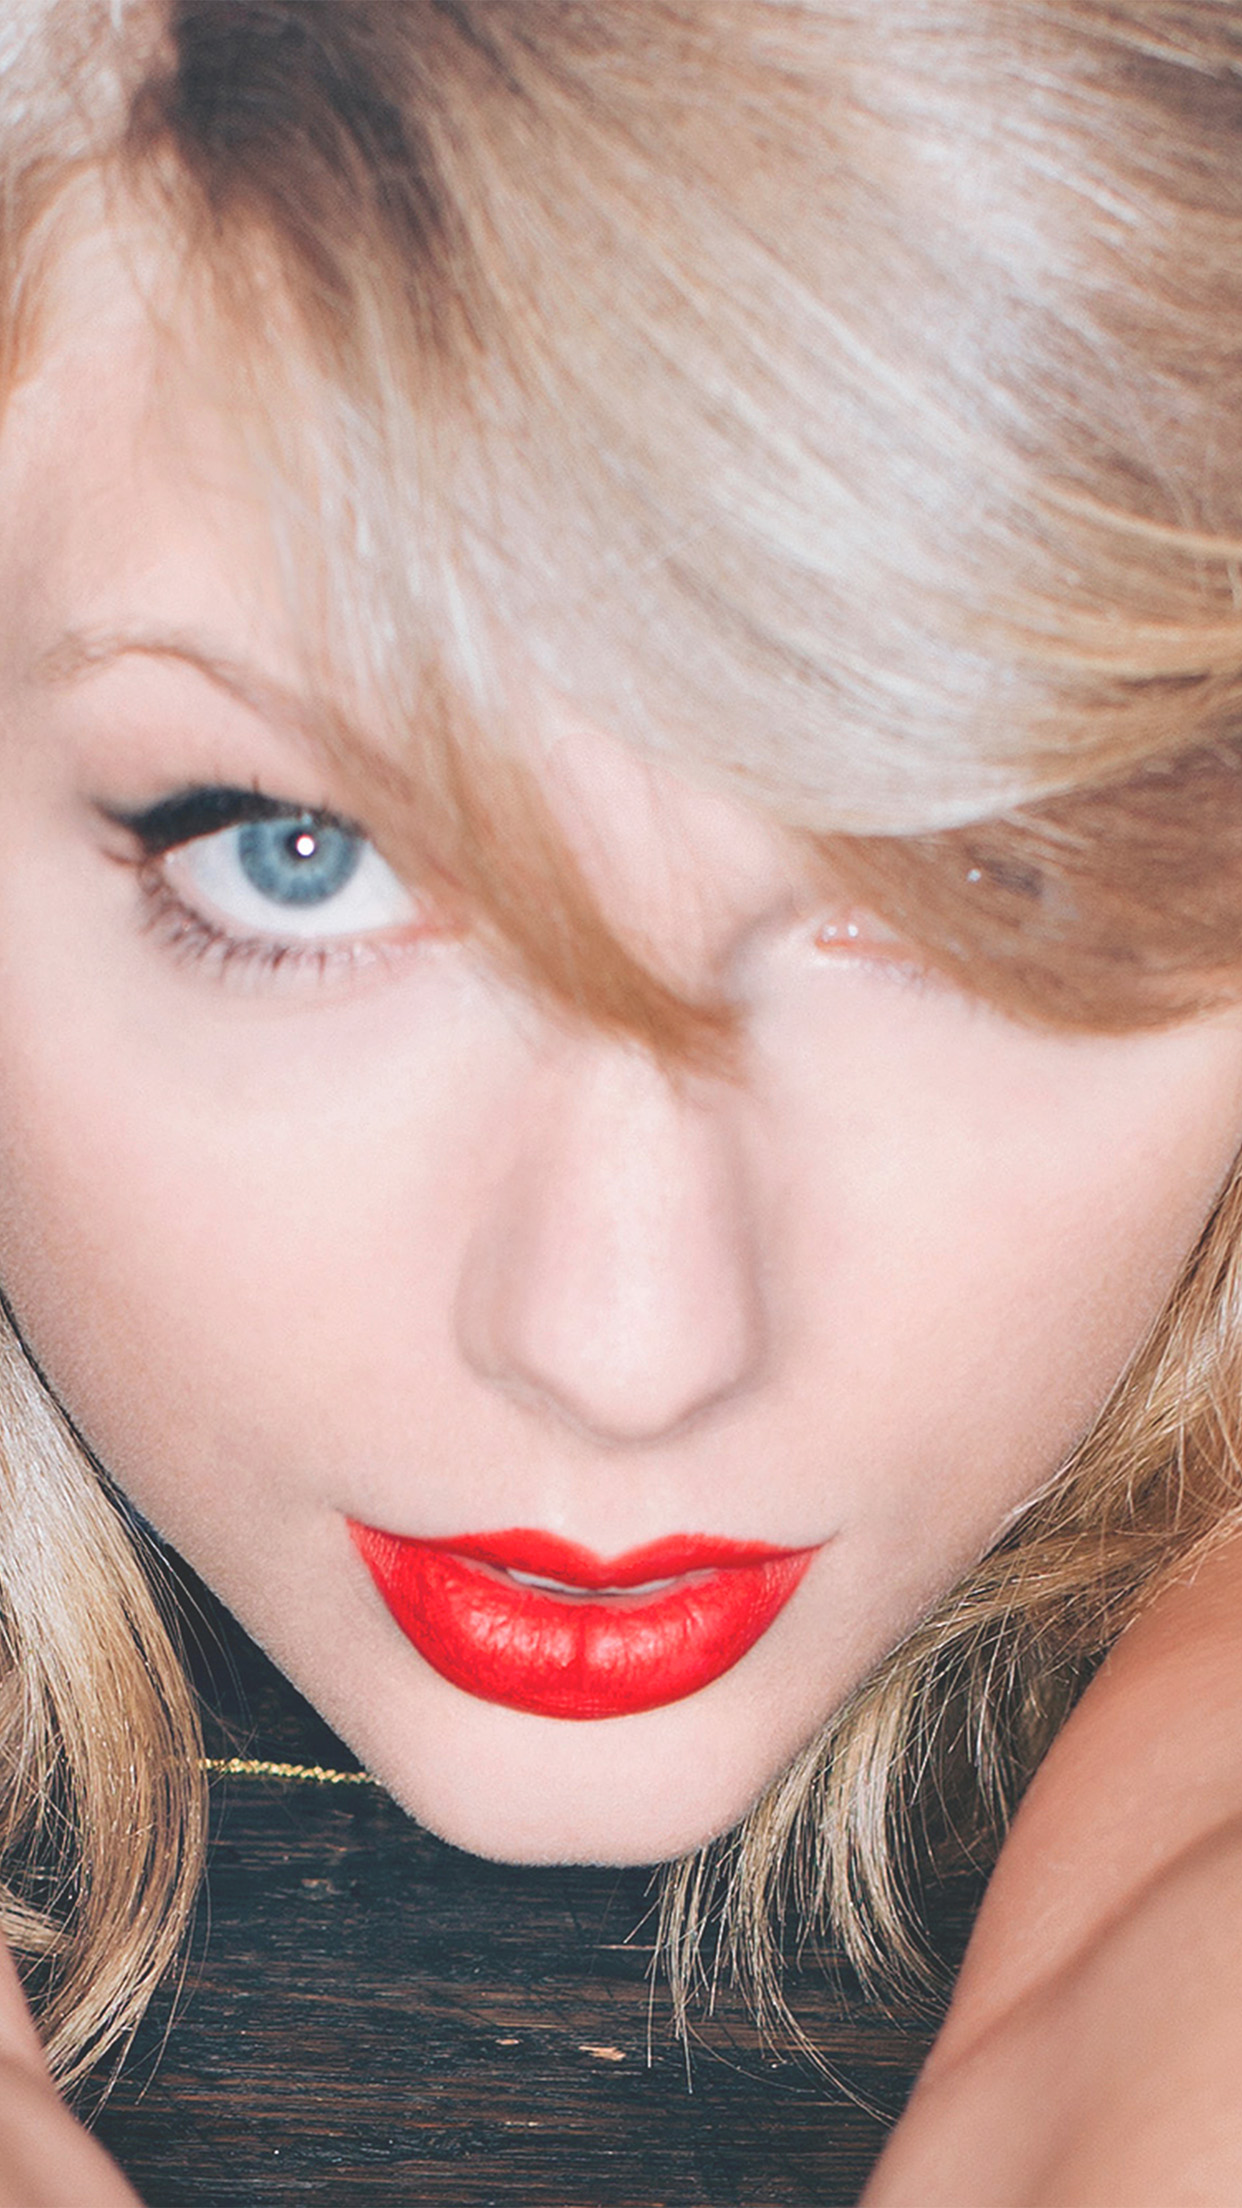 Taylor Swift Red Lips Singer Artist Android wallpaper